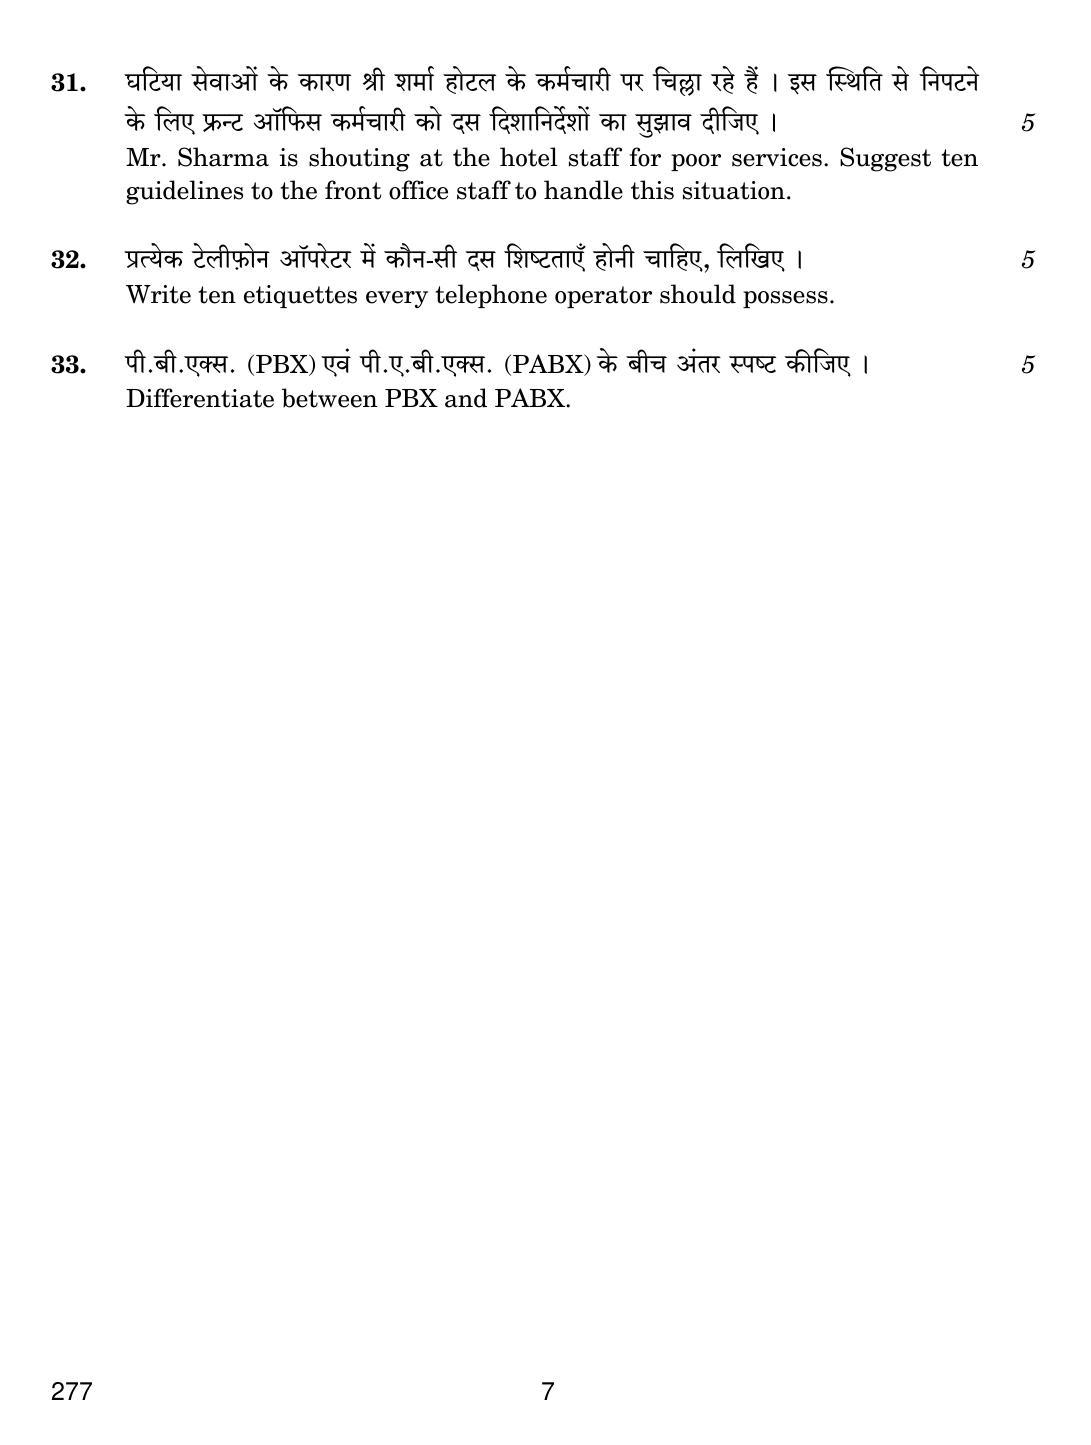 CBSE Class 12 277 Front Office Operations 2019 Question Paper - Page 7